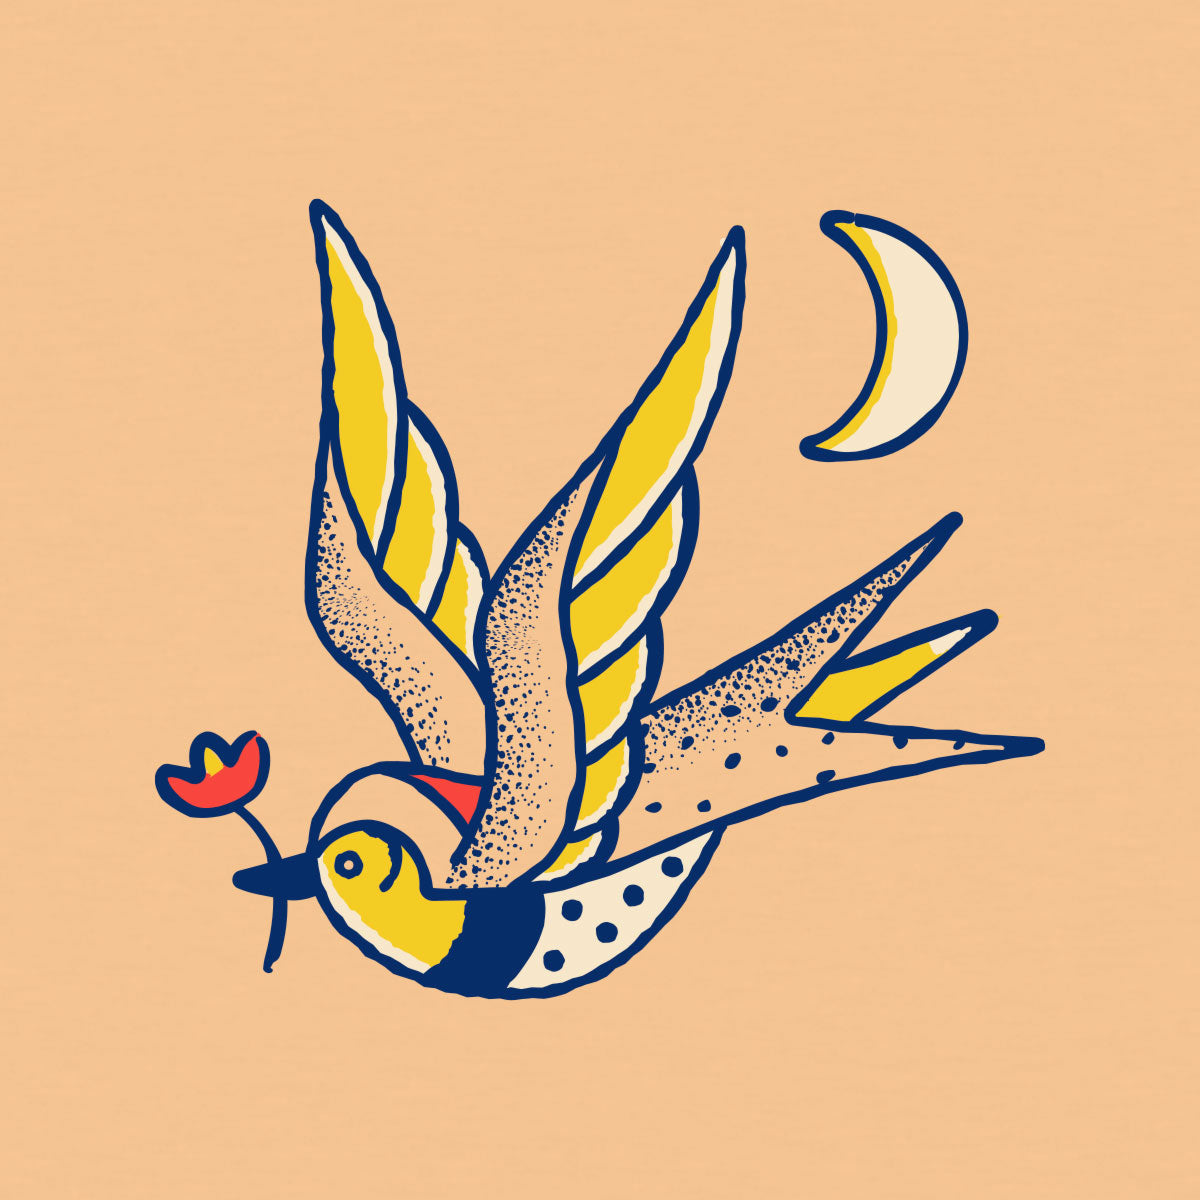 Thumbnail of the alabama state bird holding the alabama state flower drawn in american traditional tattoo style